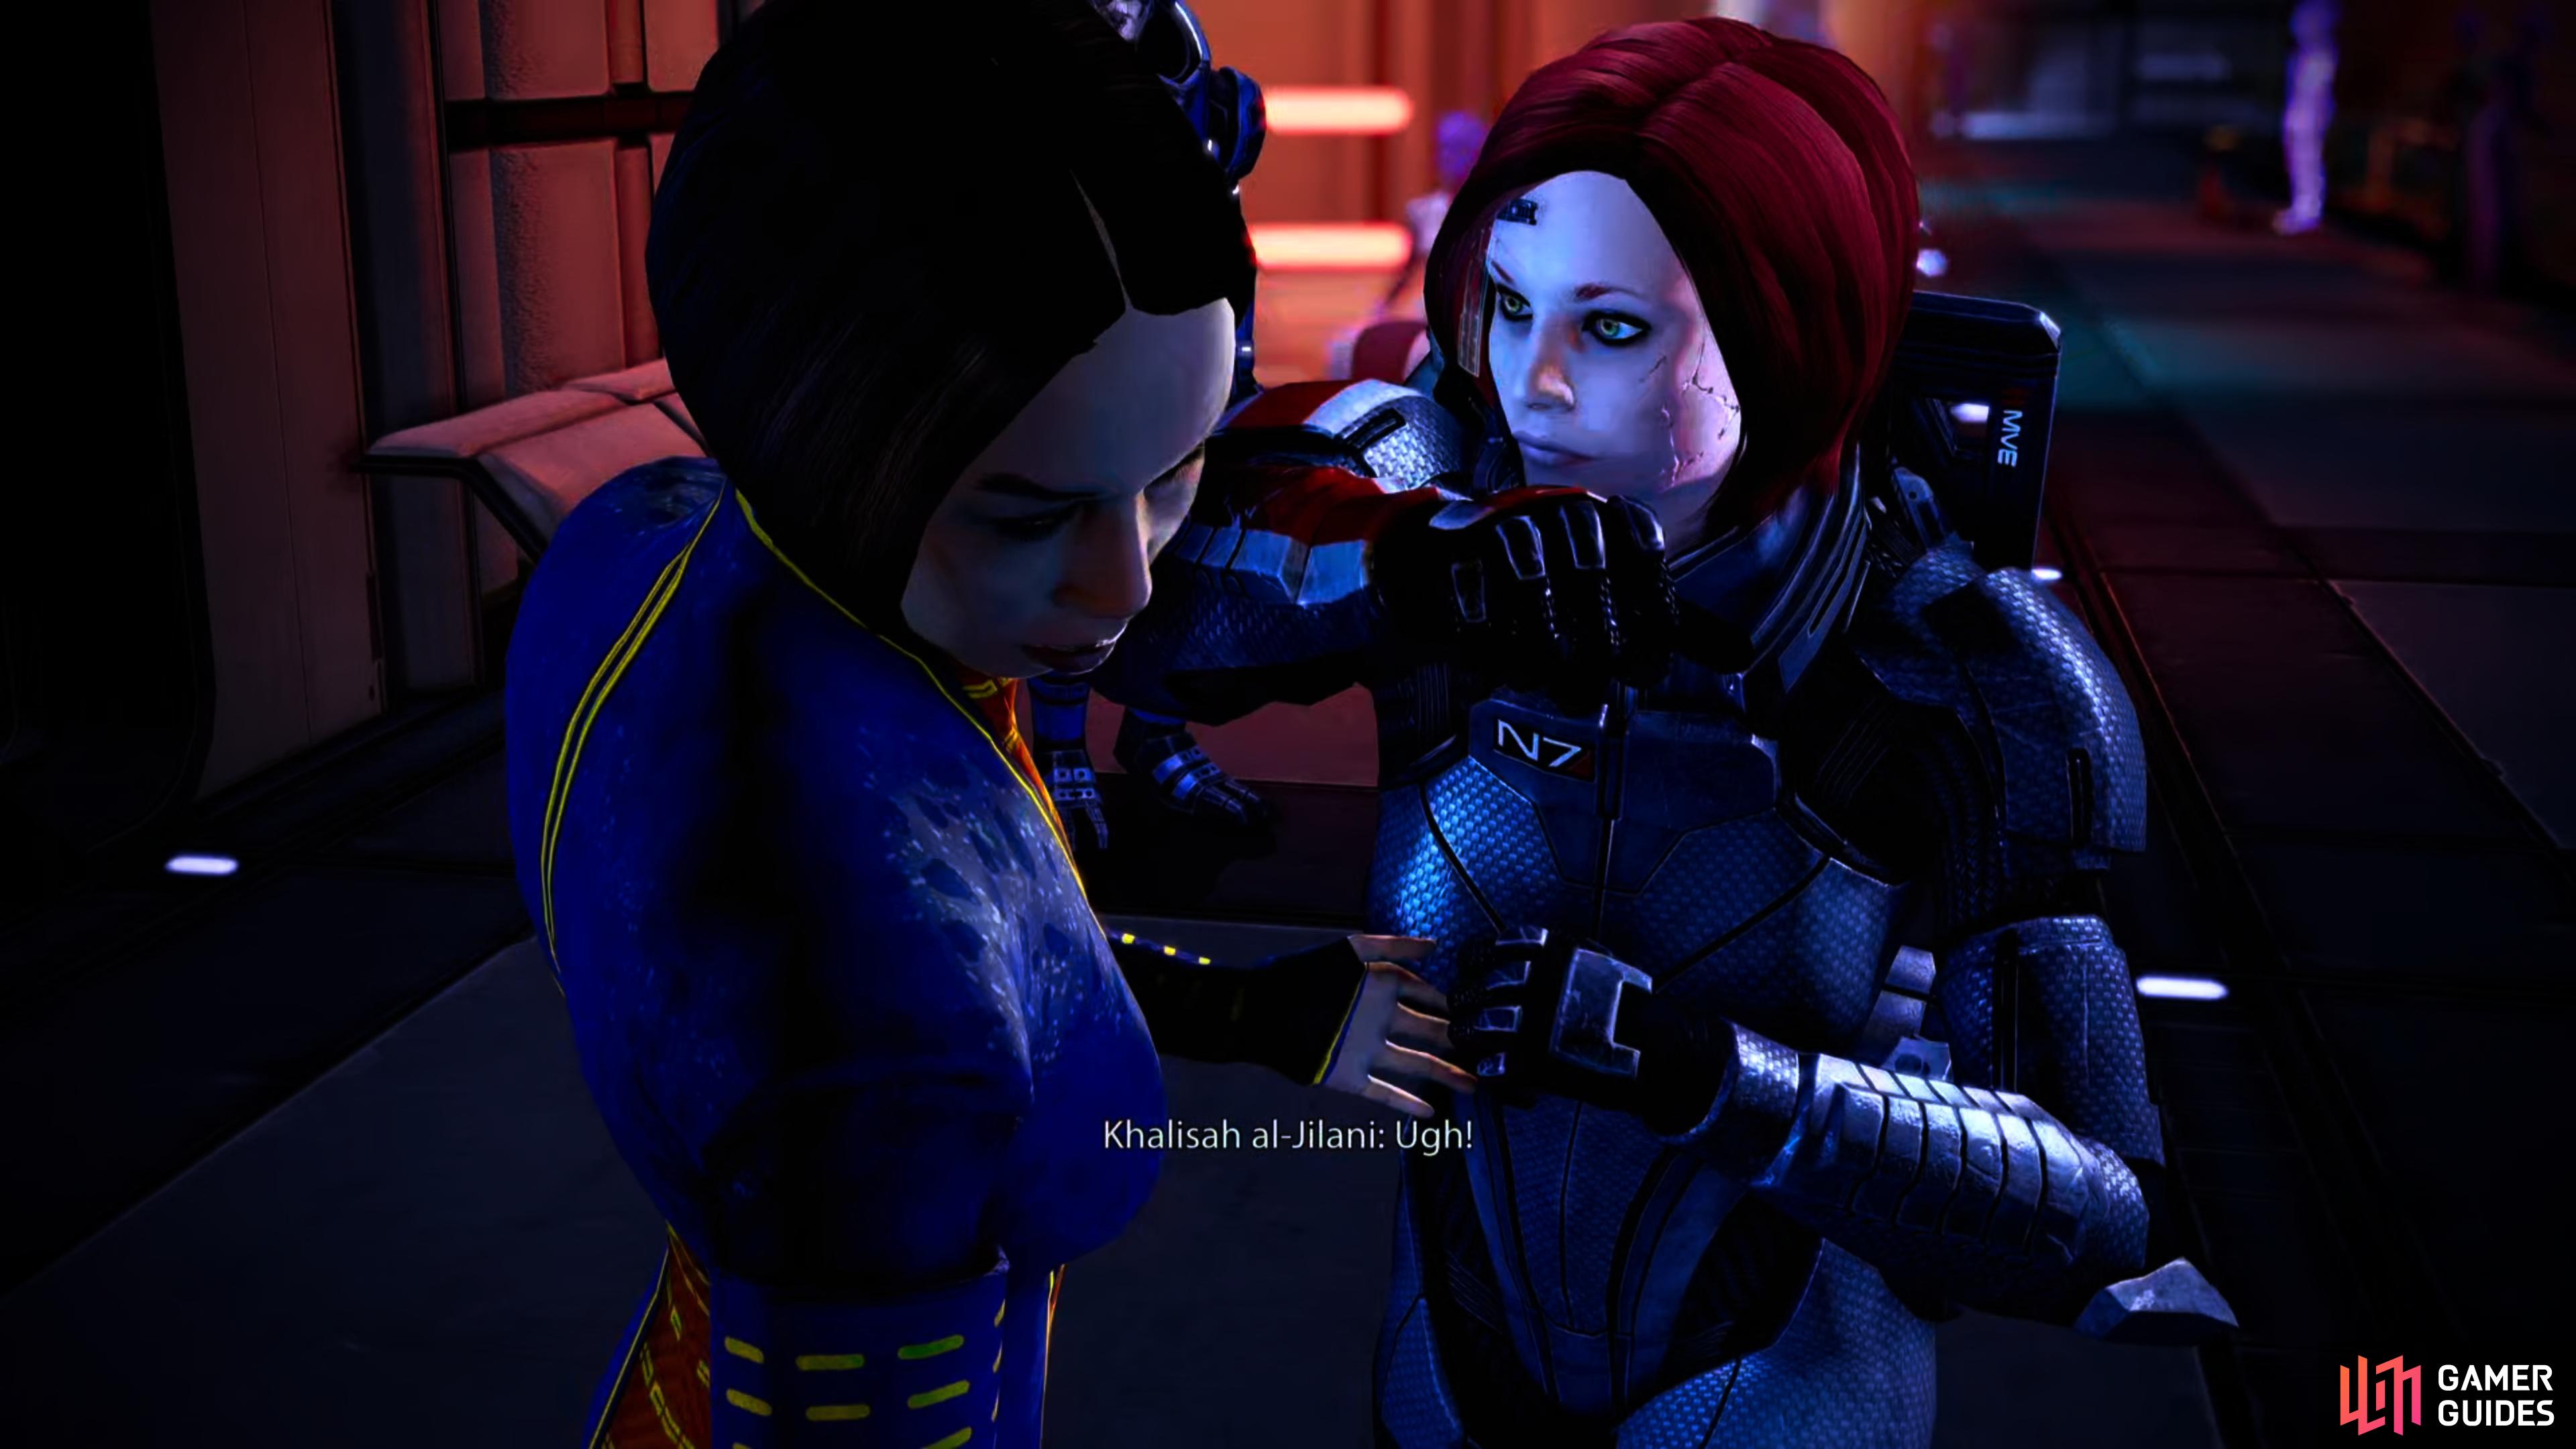 …will allow you to continue expressing Shepard's disdain for journalism.